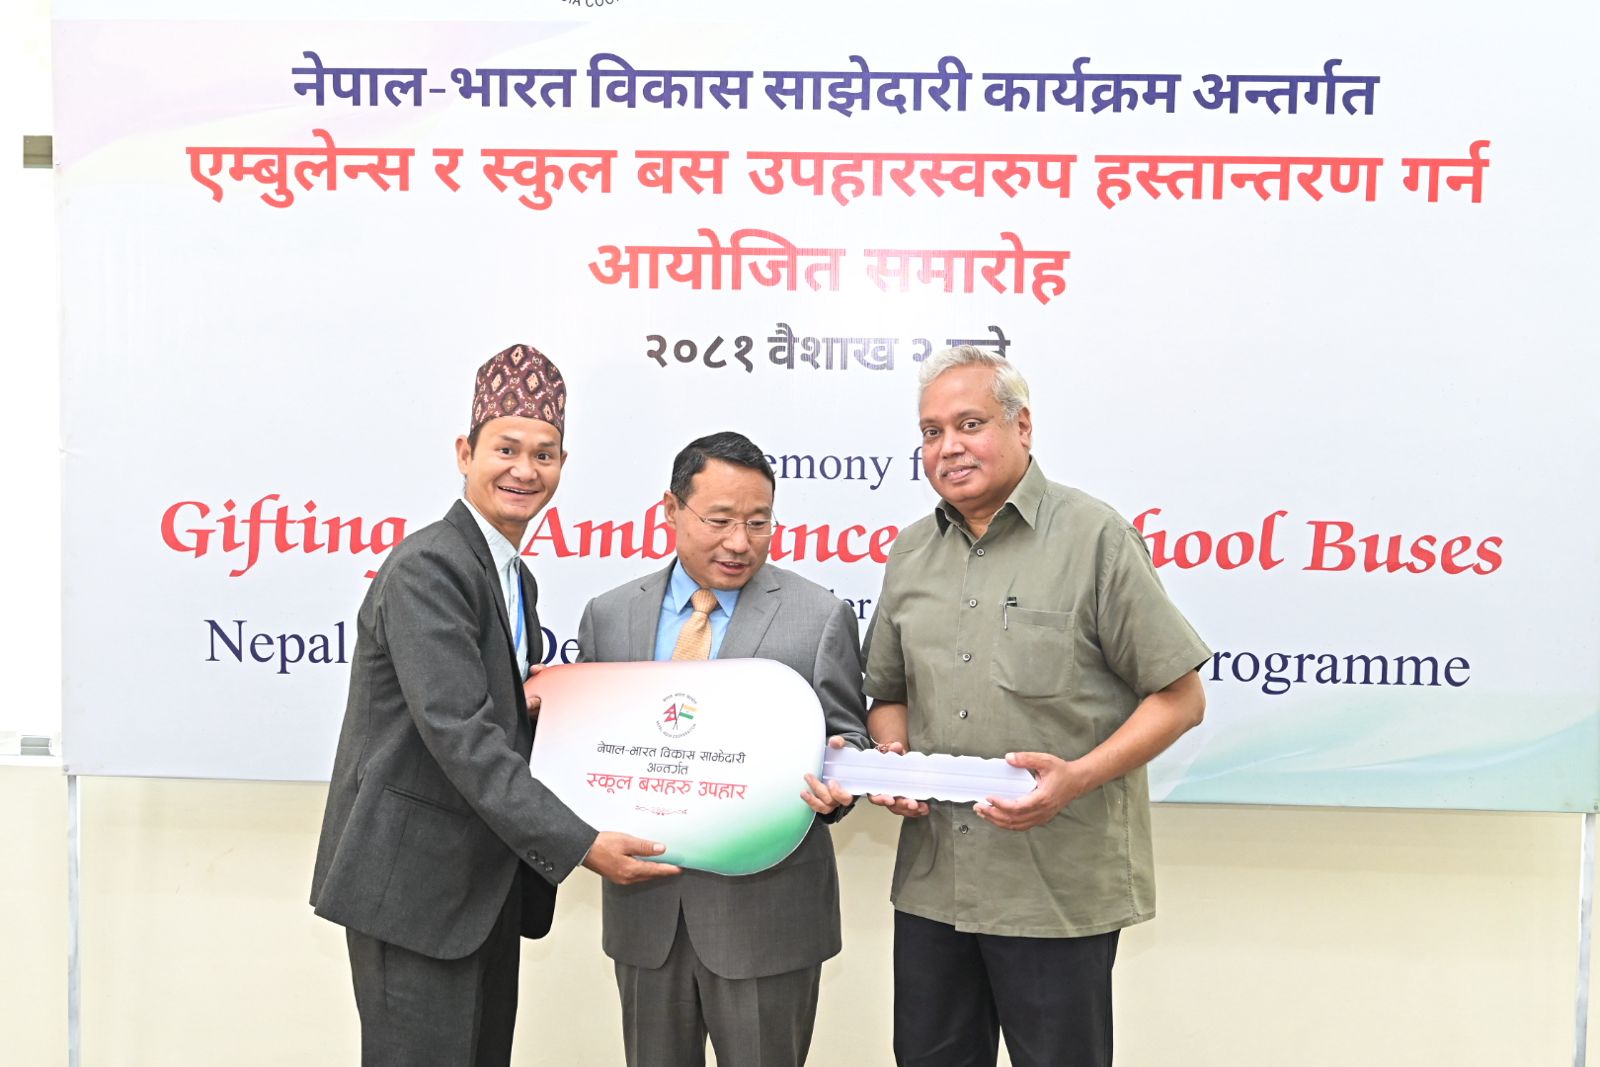 India donates ambulances and school buses to support health and education in Nepal